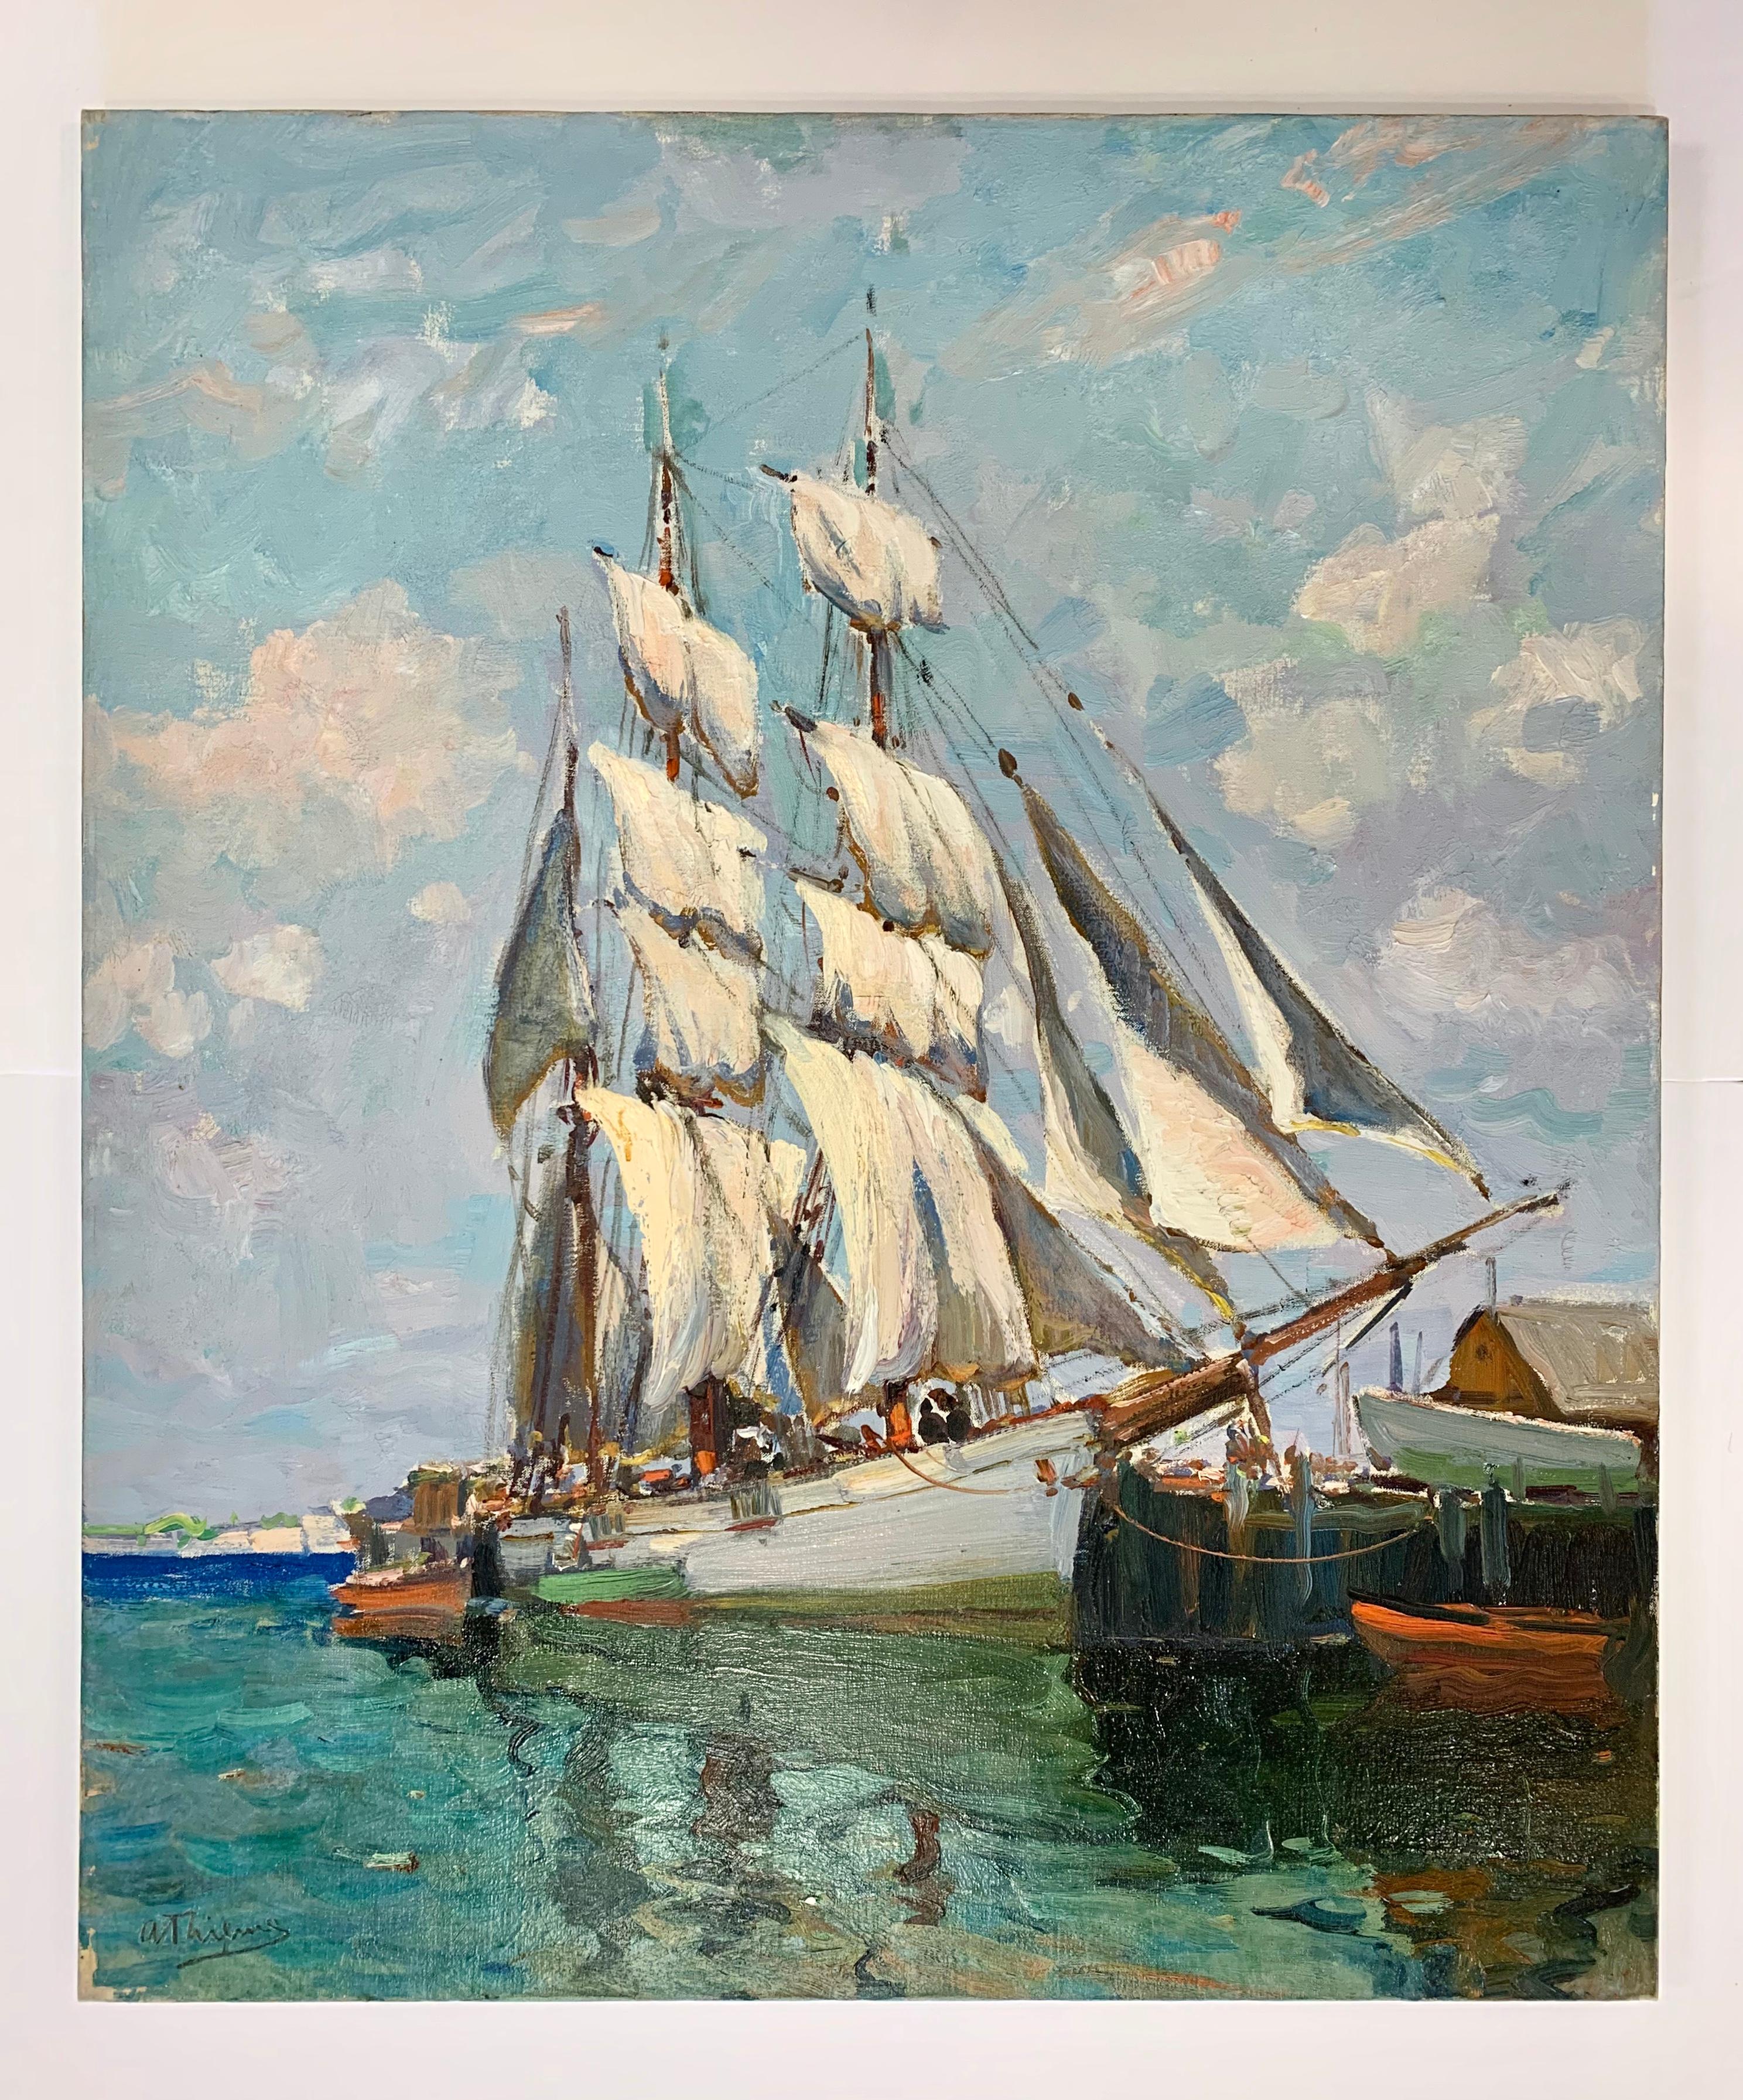 Drying Sails, American Regional School - Painting by Anthony Thieme